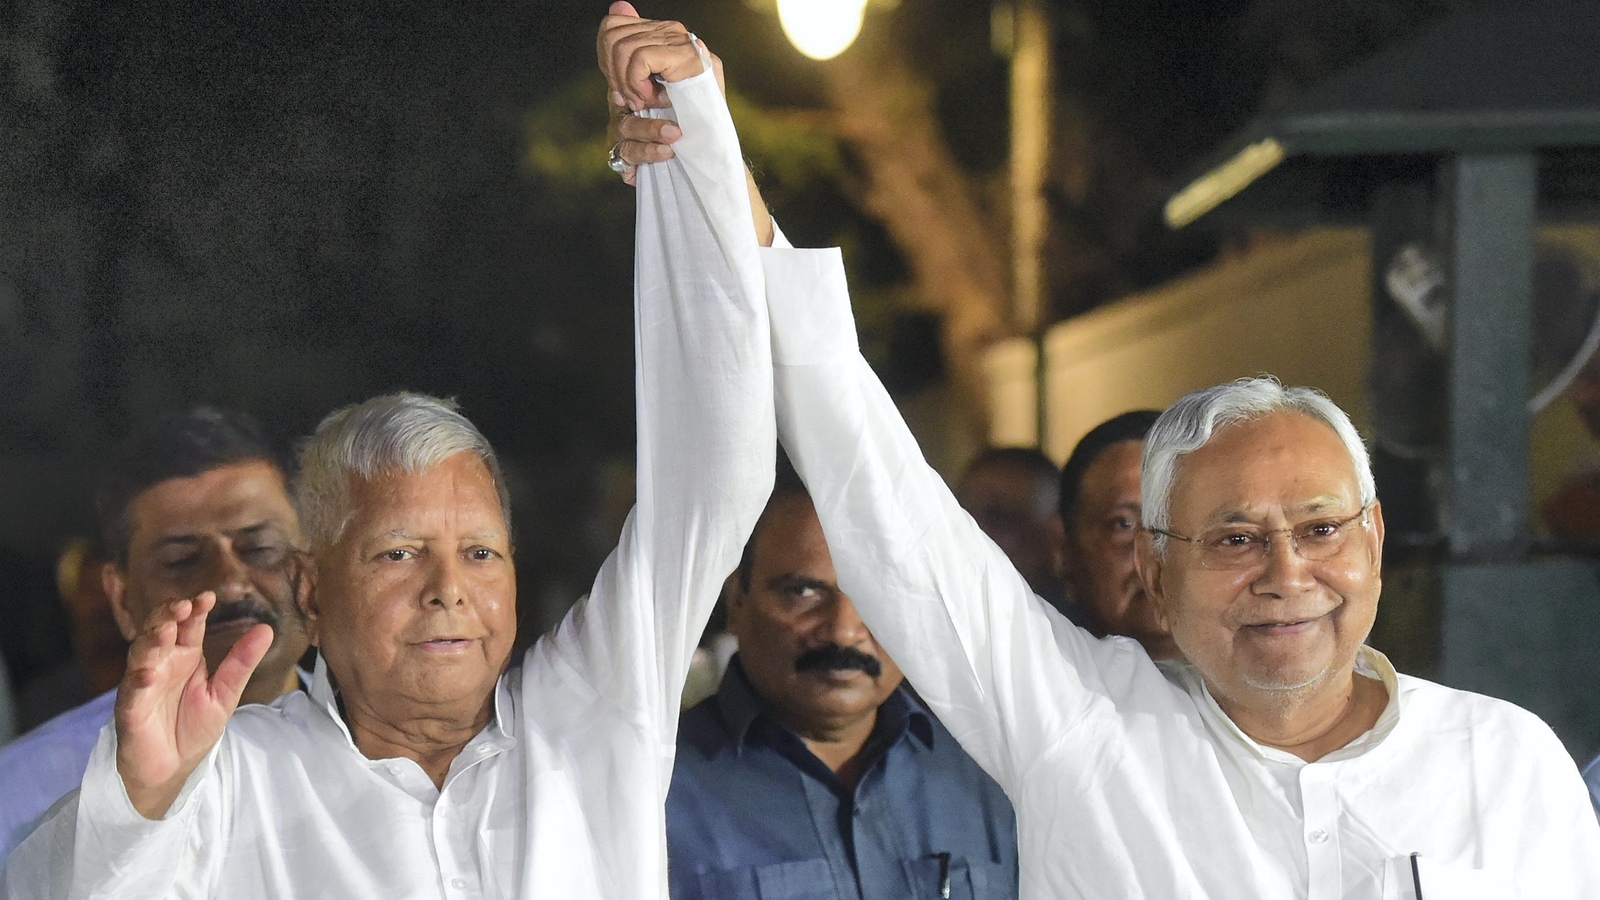 Sonia Gandhi Ki Chudai Video Mms - Nitish-Lalu all smiles after meet with Sonia, more talks after Cong prez  polls | Latest News India - Hindustan Times